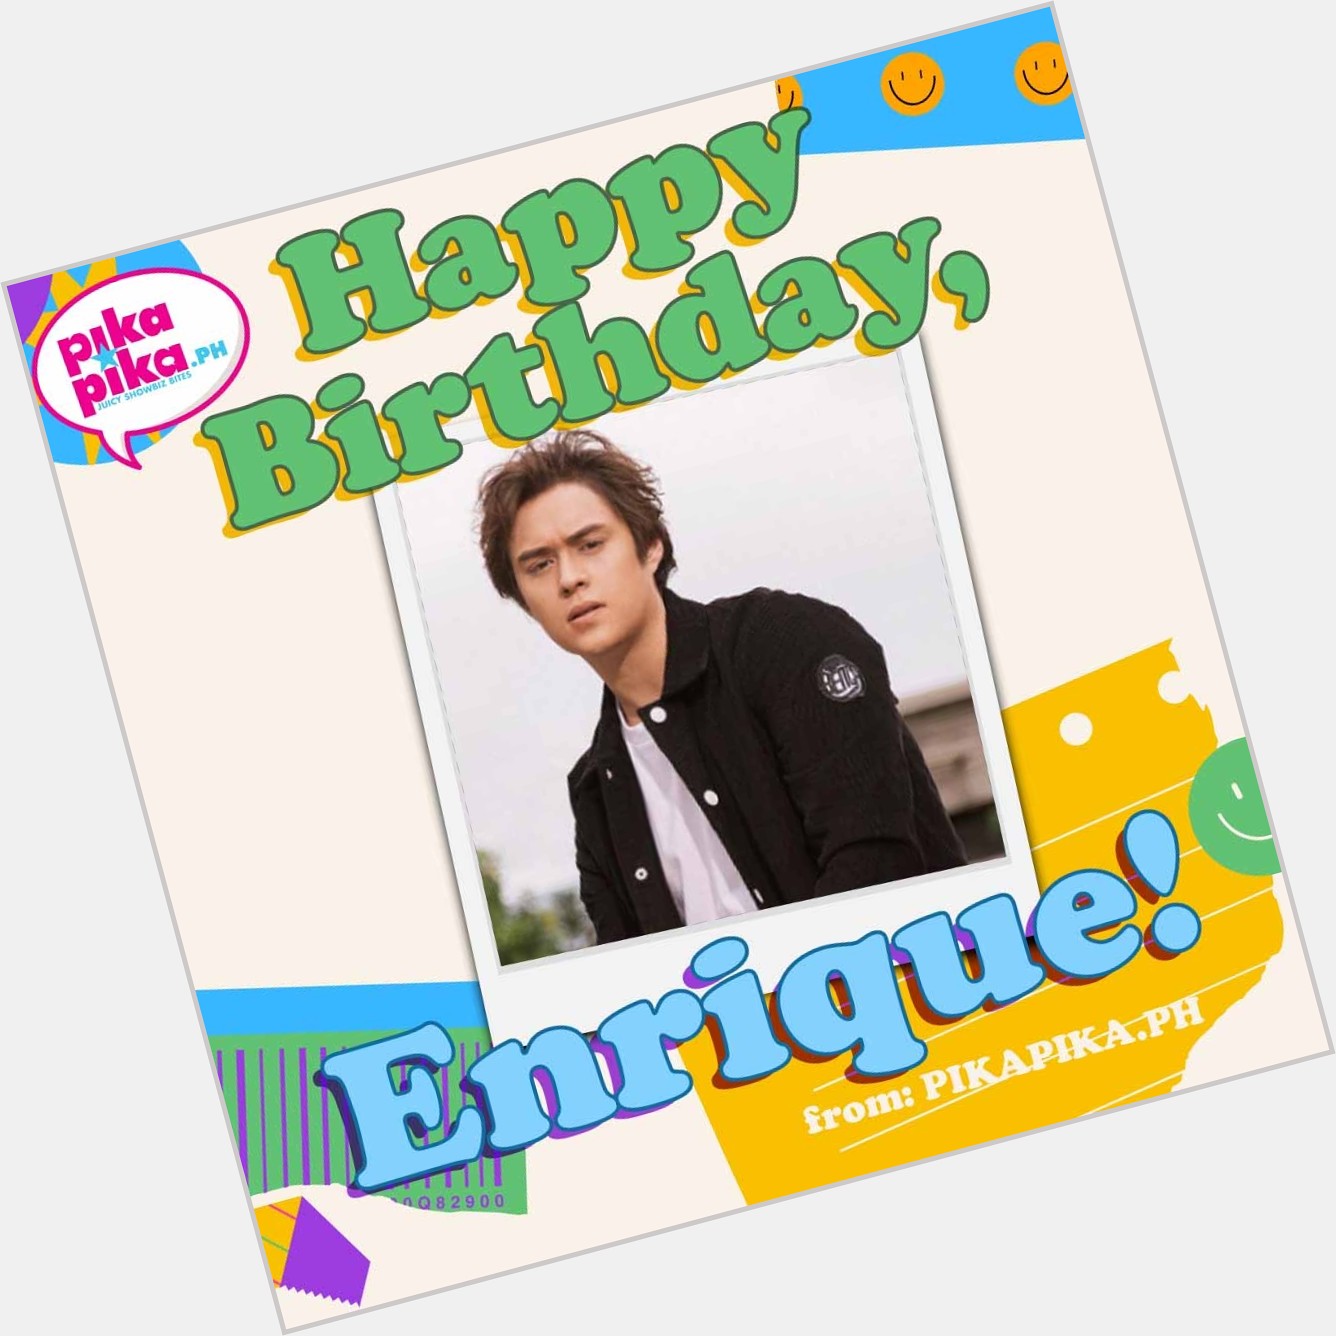 Happy birthday, Enrique Gil! May all your dreams and wishes come true.   